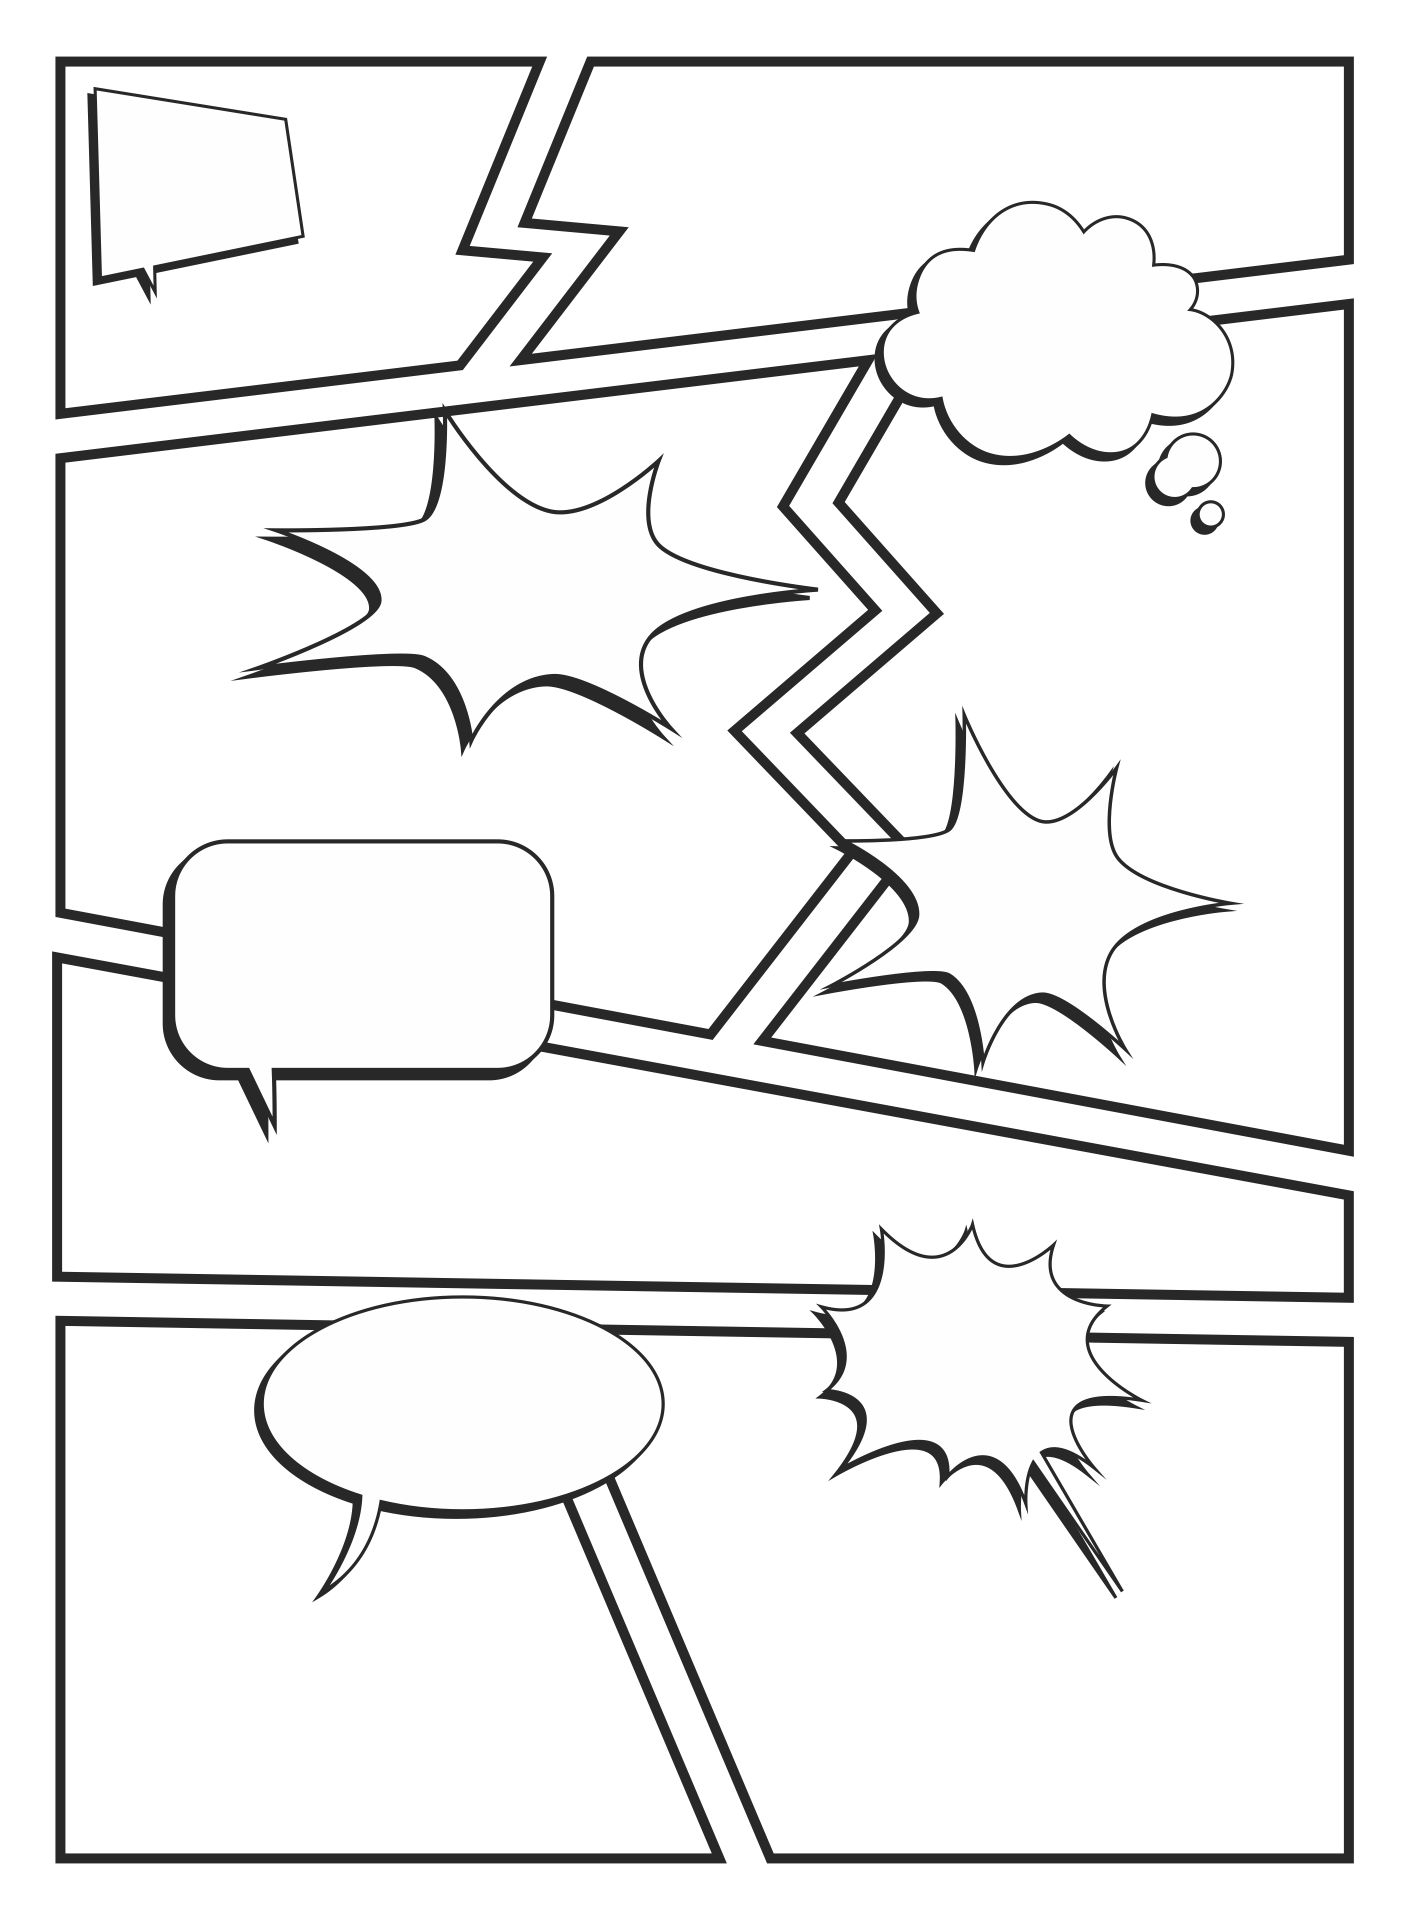 7-best-images-of-comic-book-templates-printable-free-printable-comic